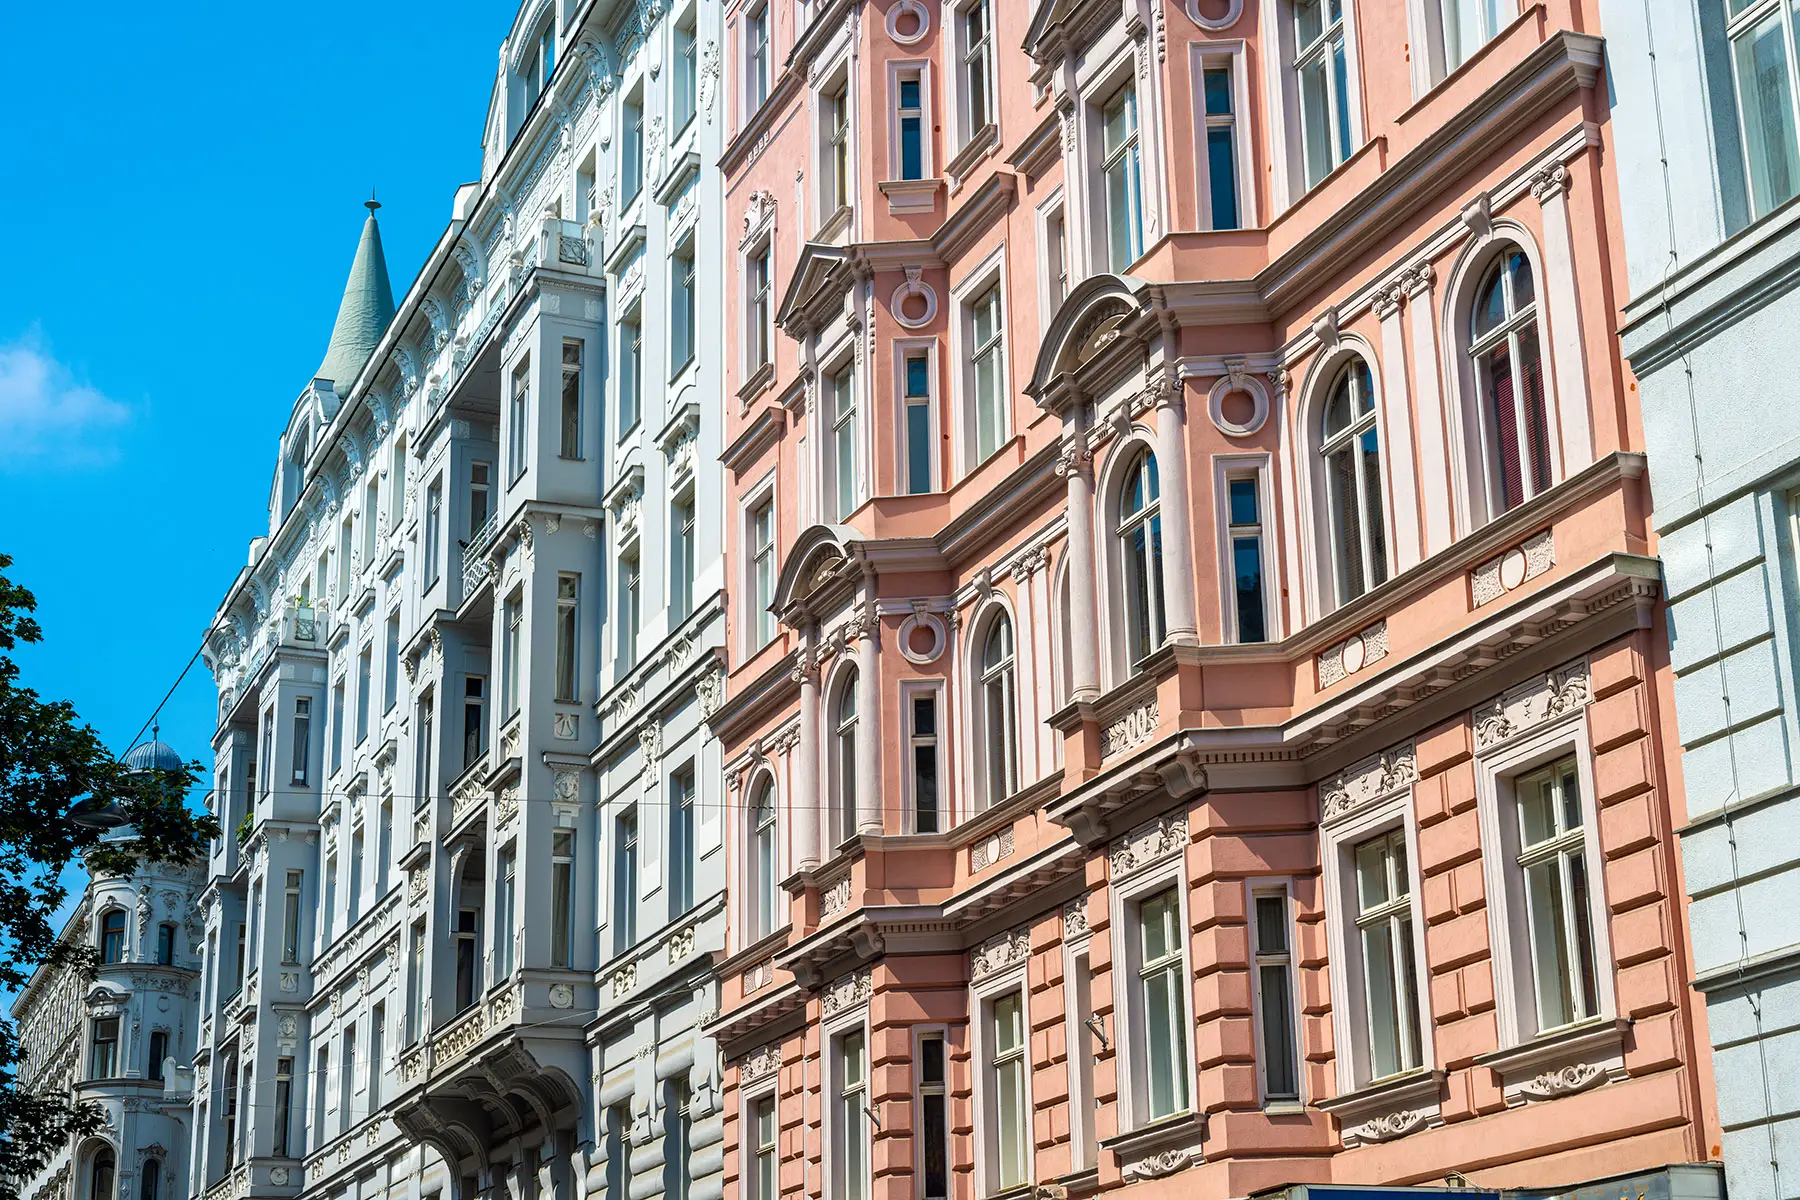 Historical apartment buildings in Vienna